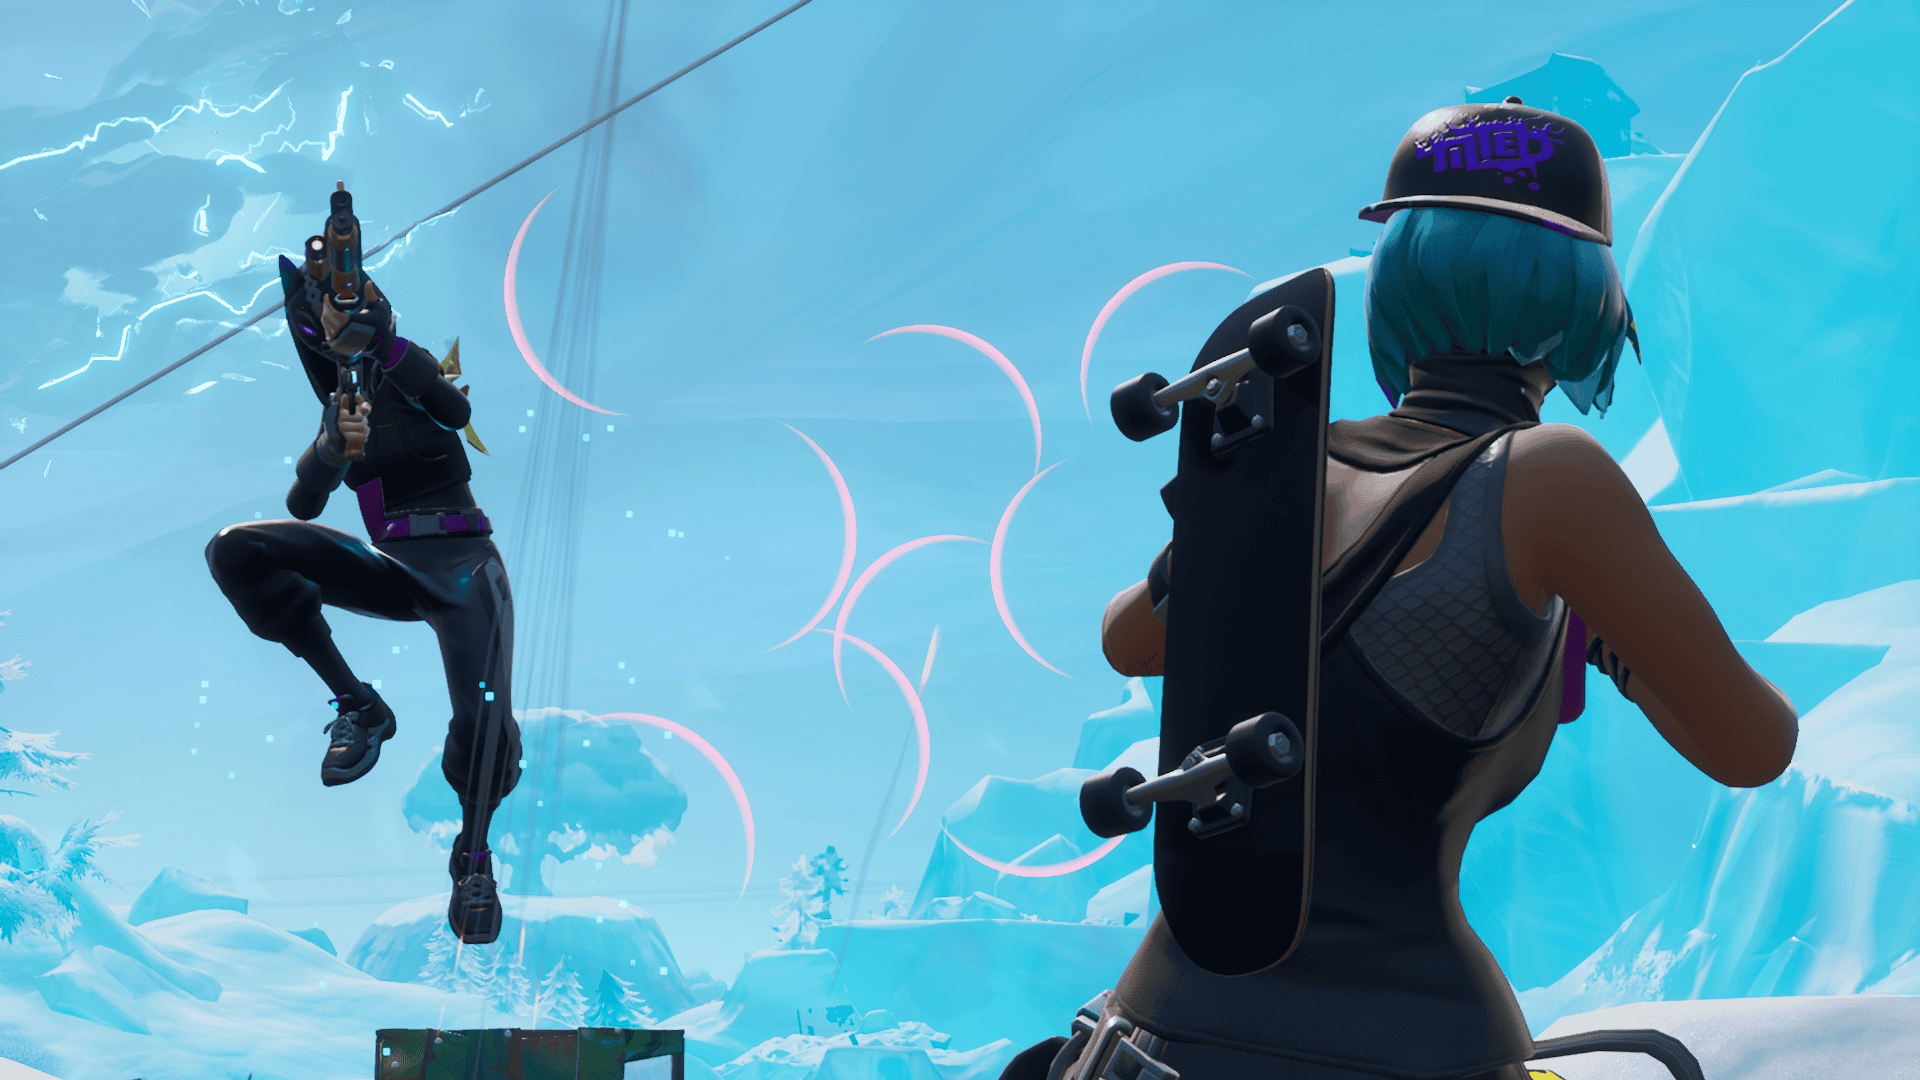 What’s New in Fortnite New Season: Upcoming Latest Updates